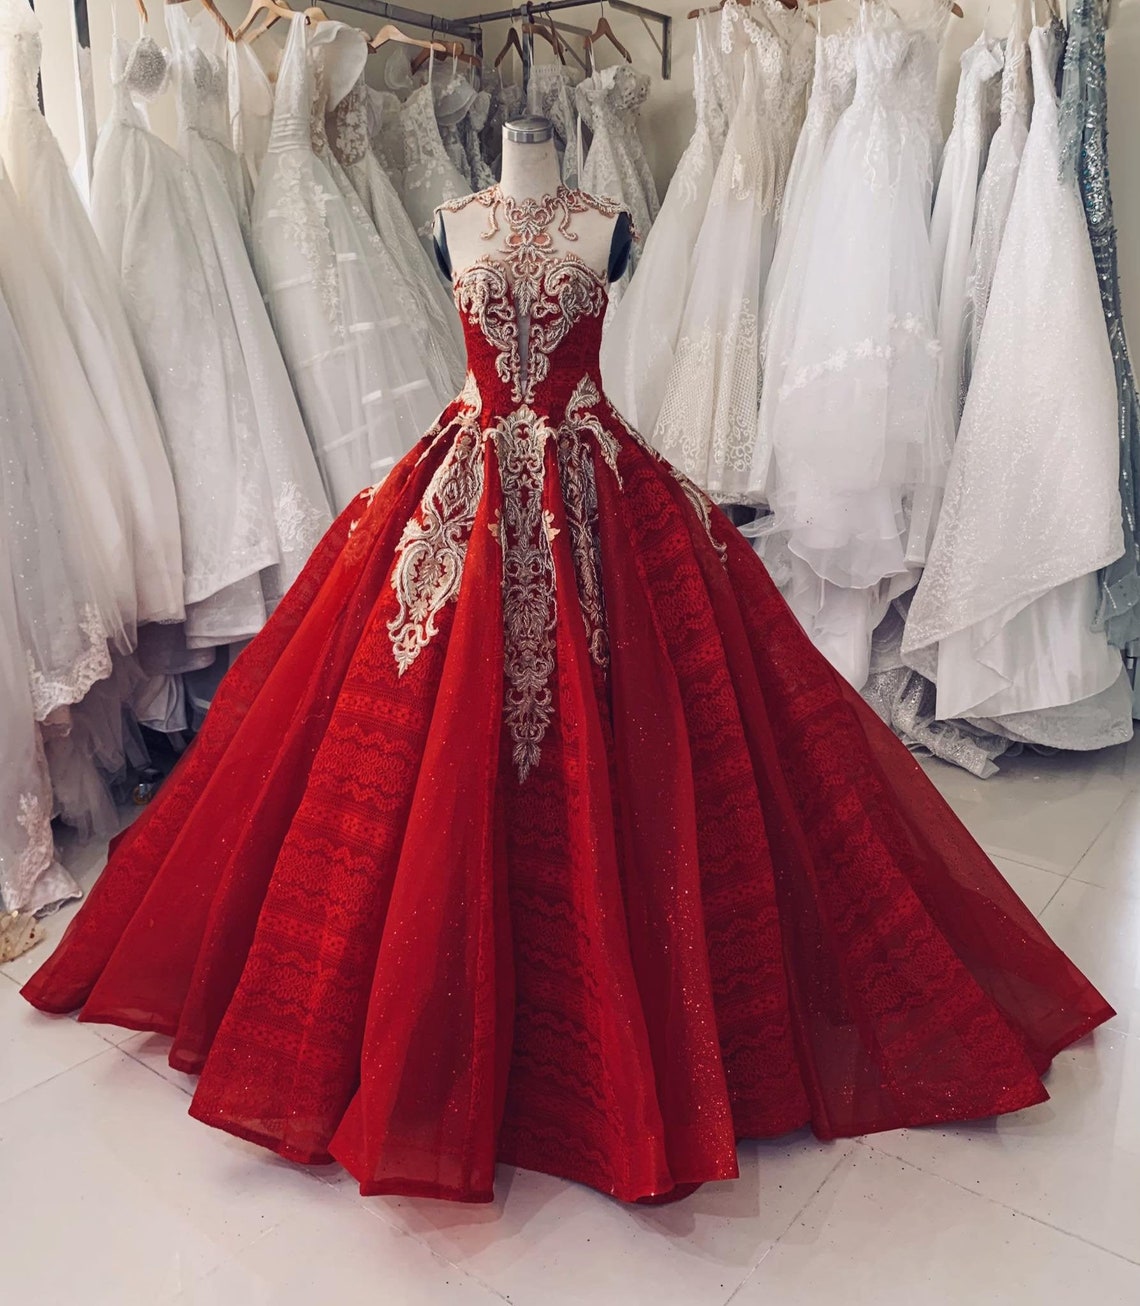 Gorgeous Princess Red and Gold Wedding Dress Made to Order image 1